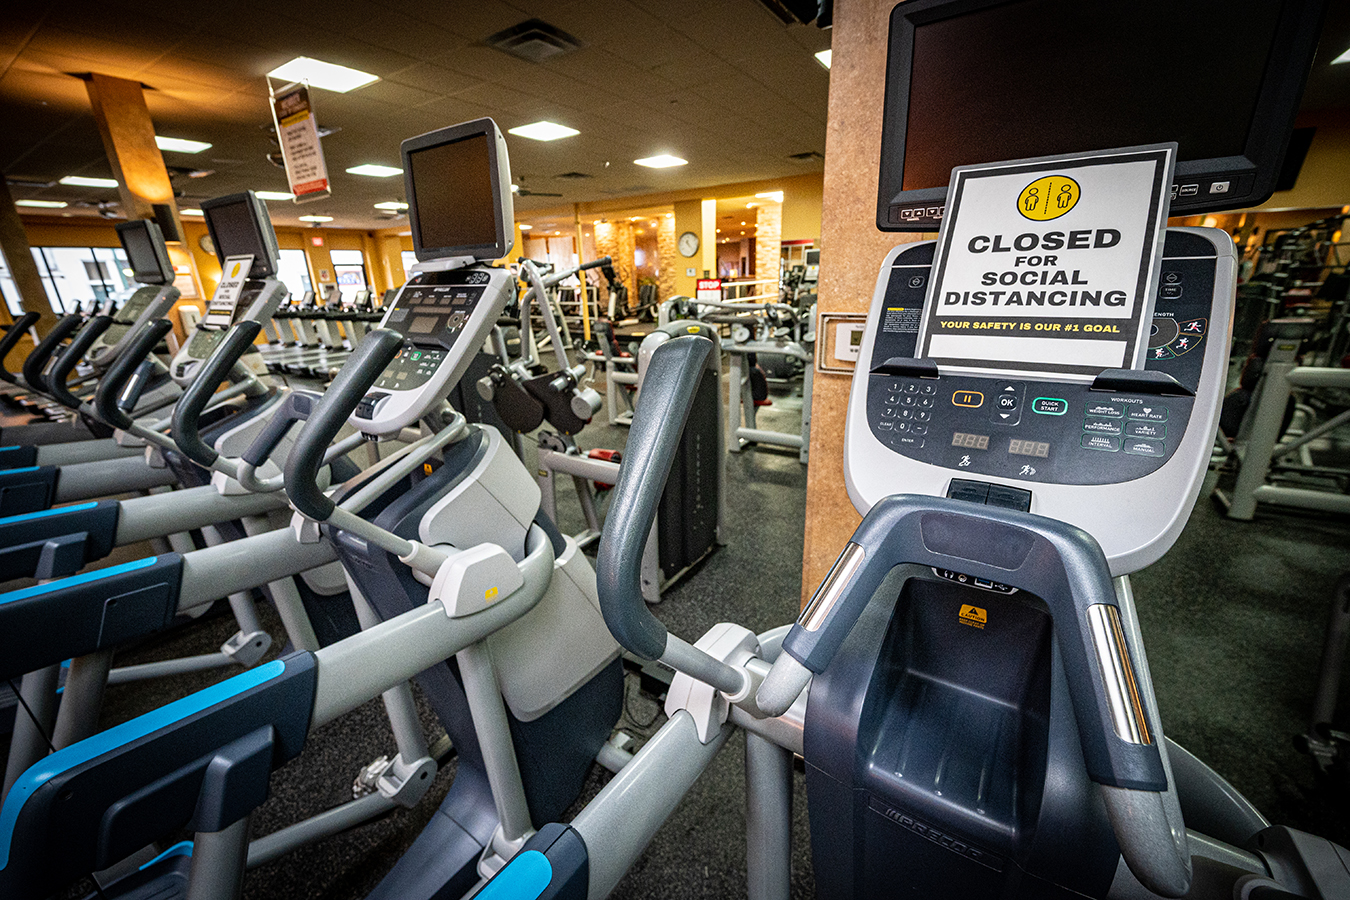 Making Gyms Safer: Why the Virus Is 